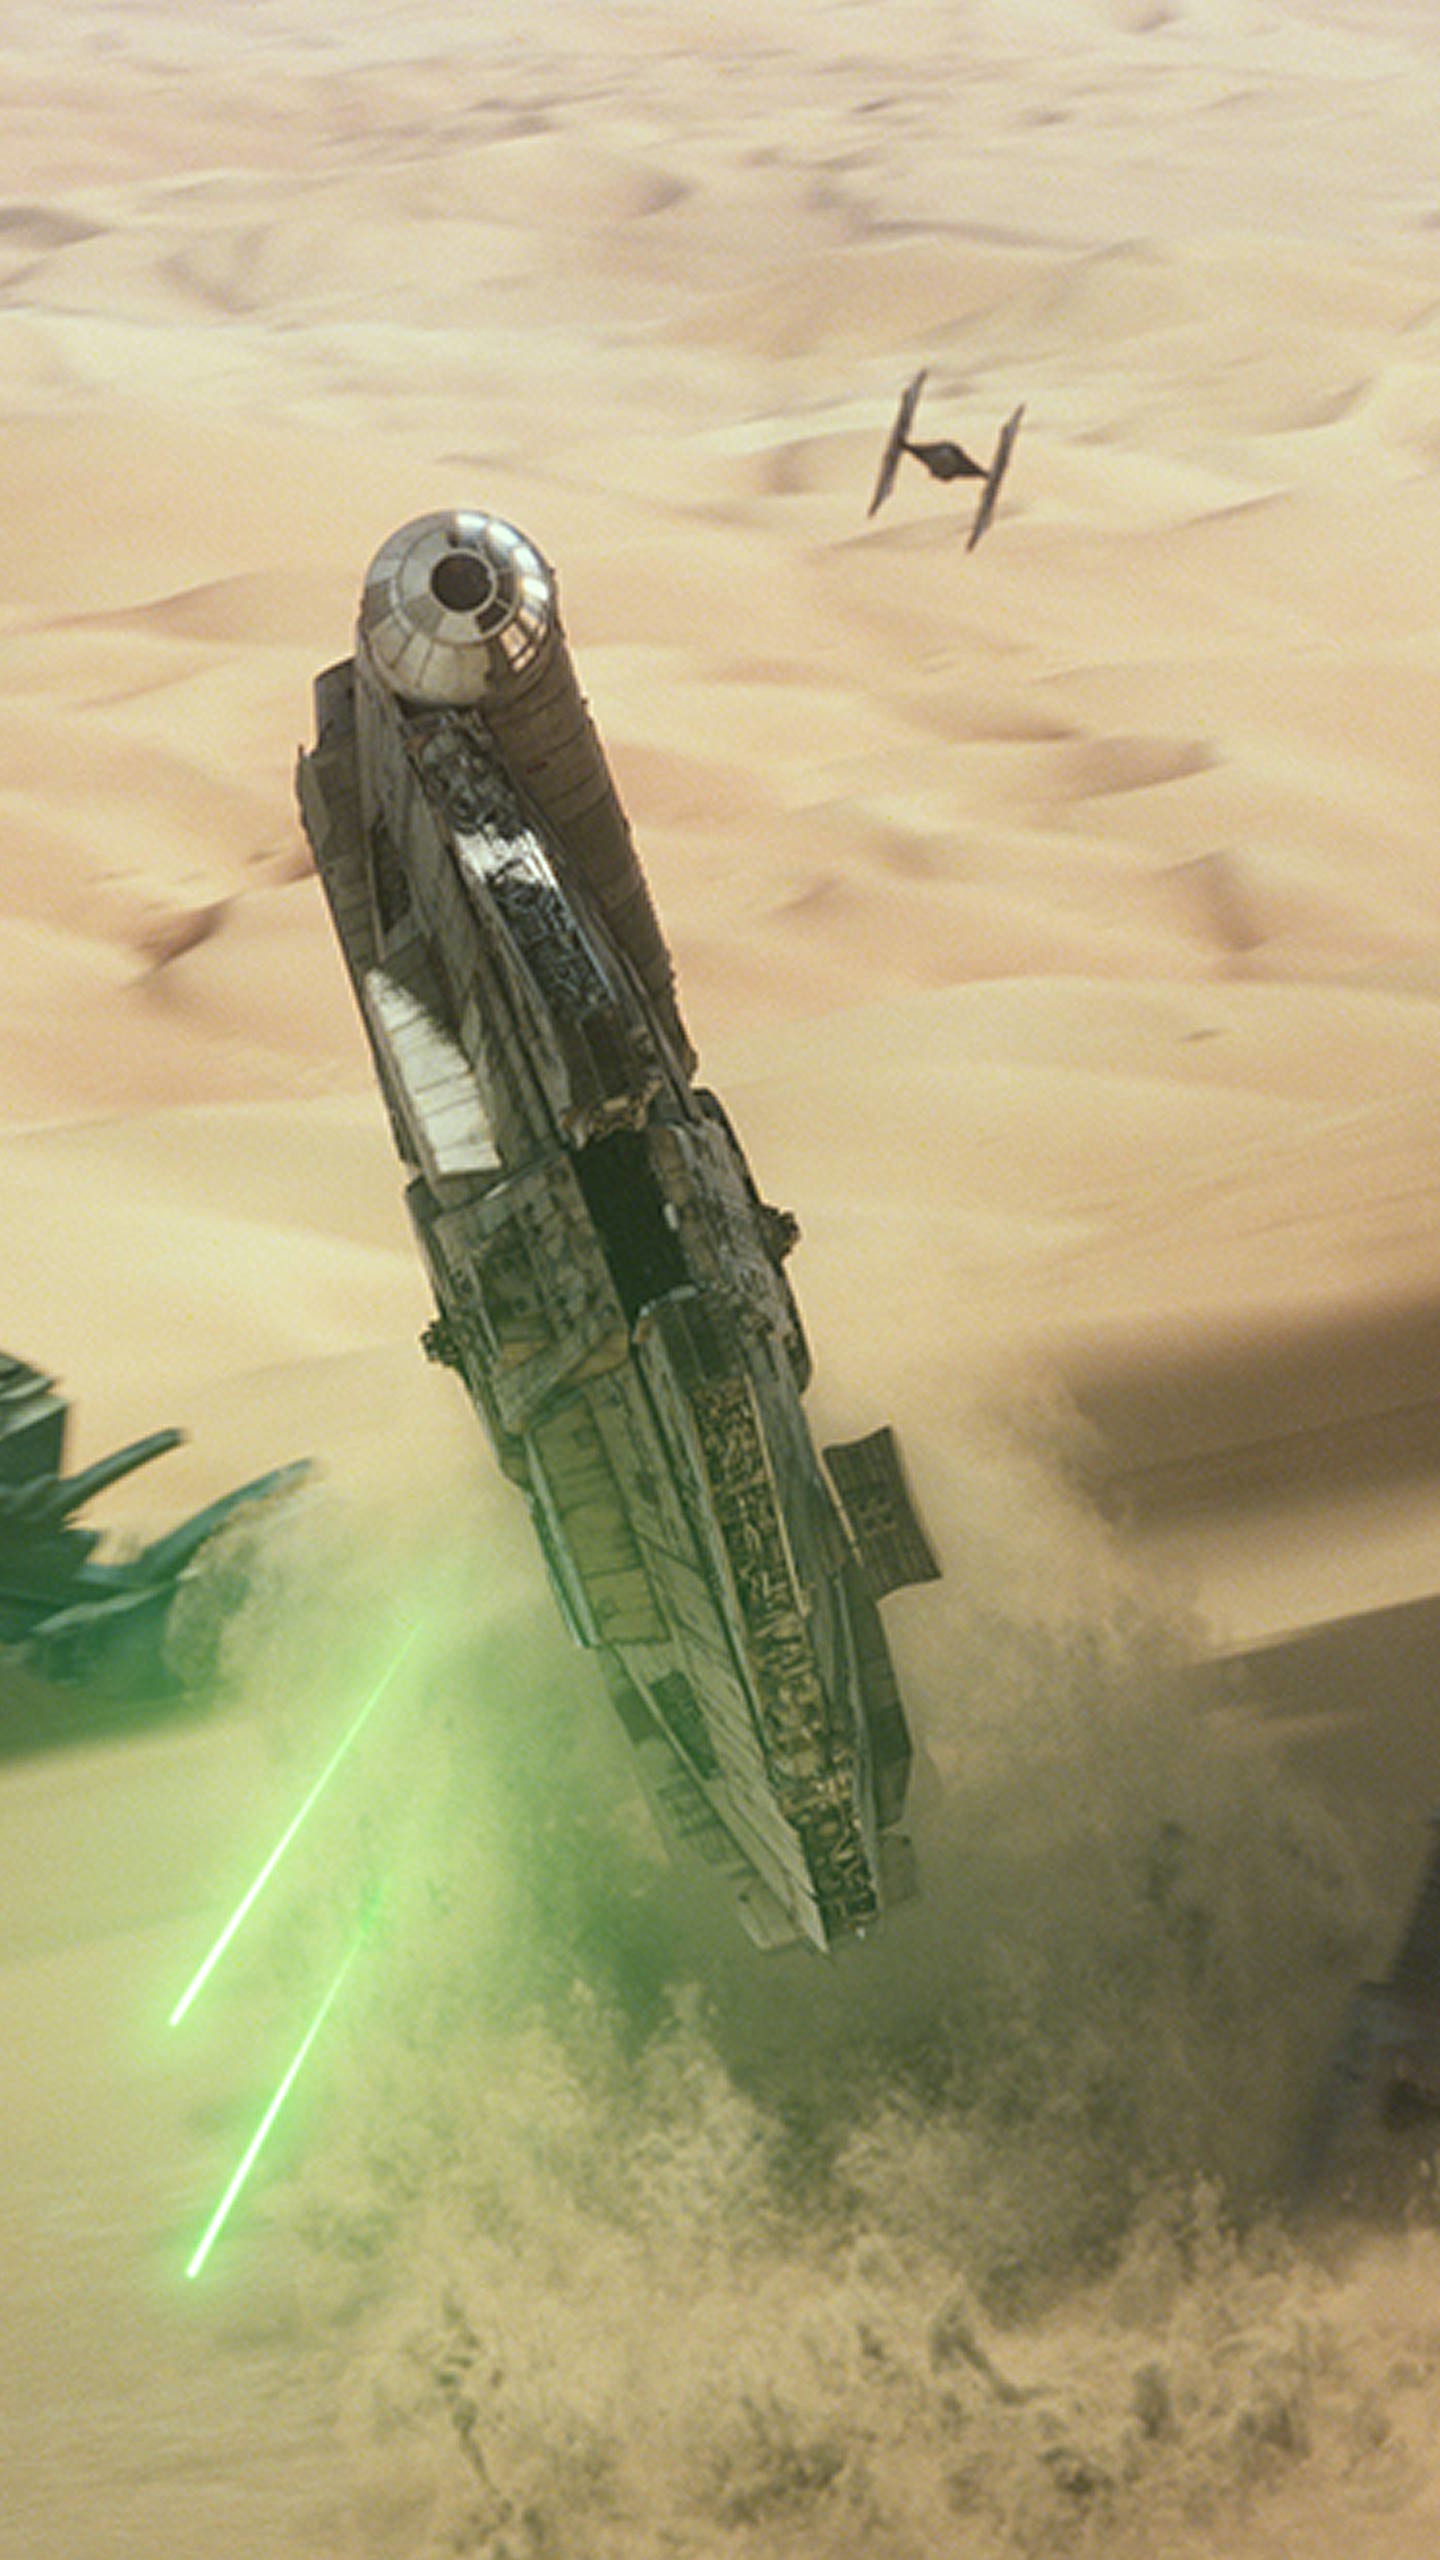 1440x2560 Star Wars: The Force Awakens wallpapers for your iPhone 6s and